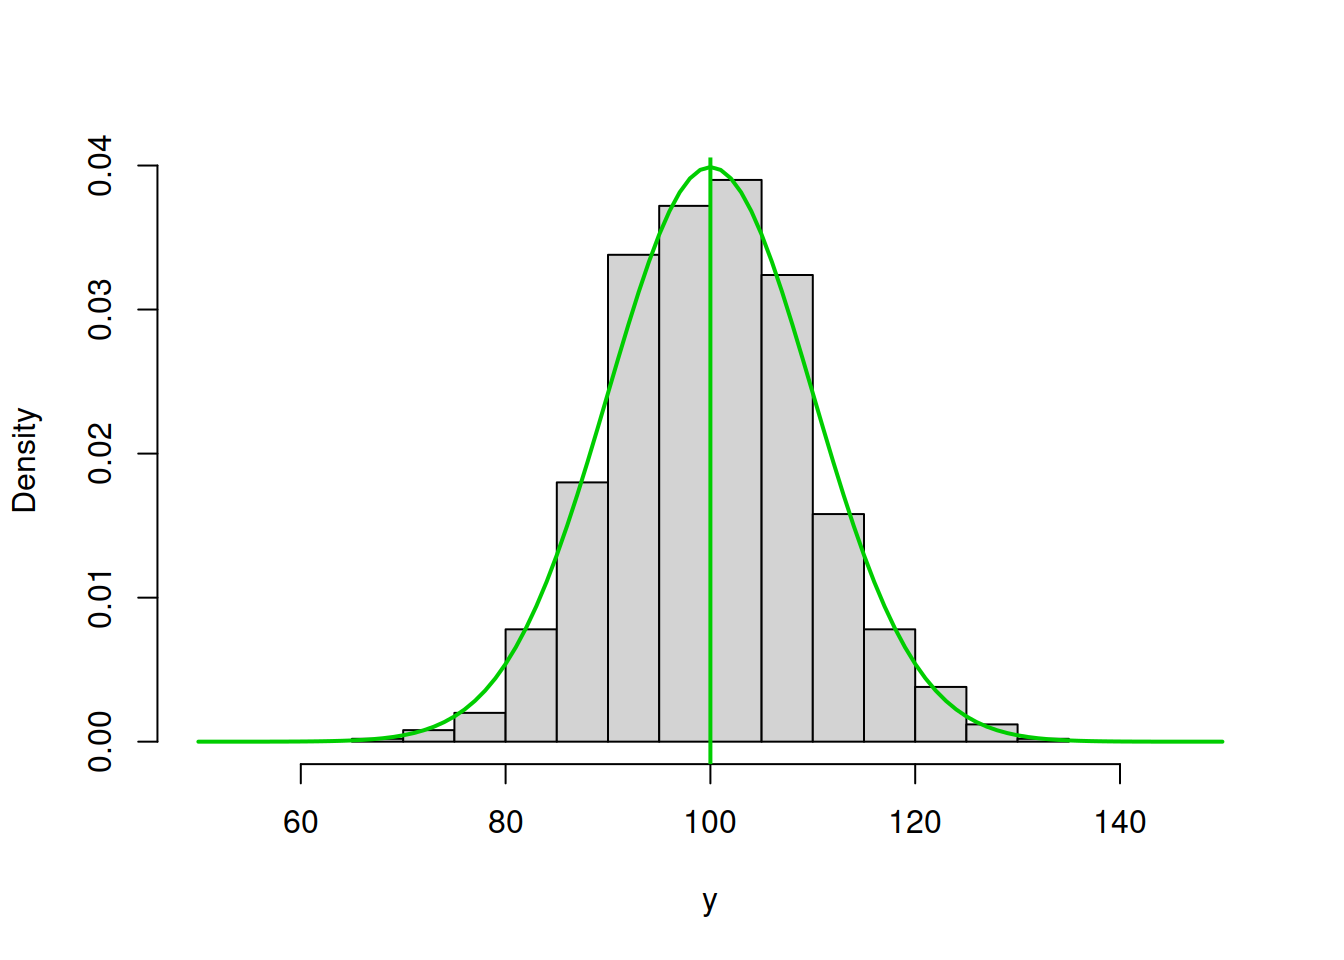 ML example with Normal curve and $\hat{\mu}_y=100$ and $\hat{\sigma}=10$